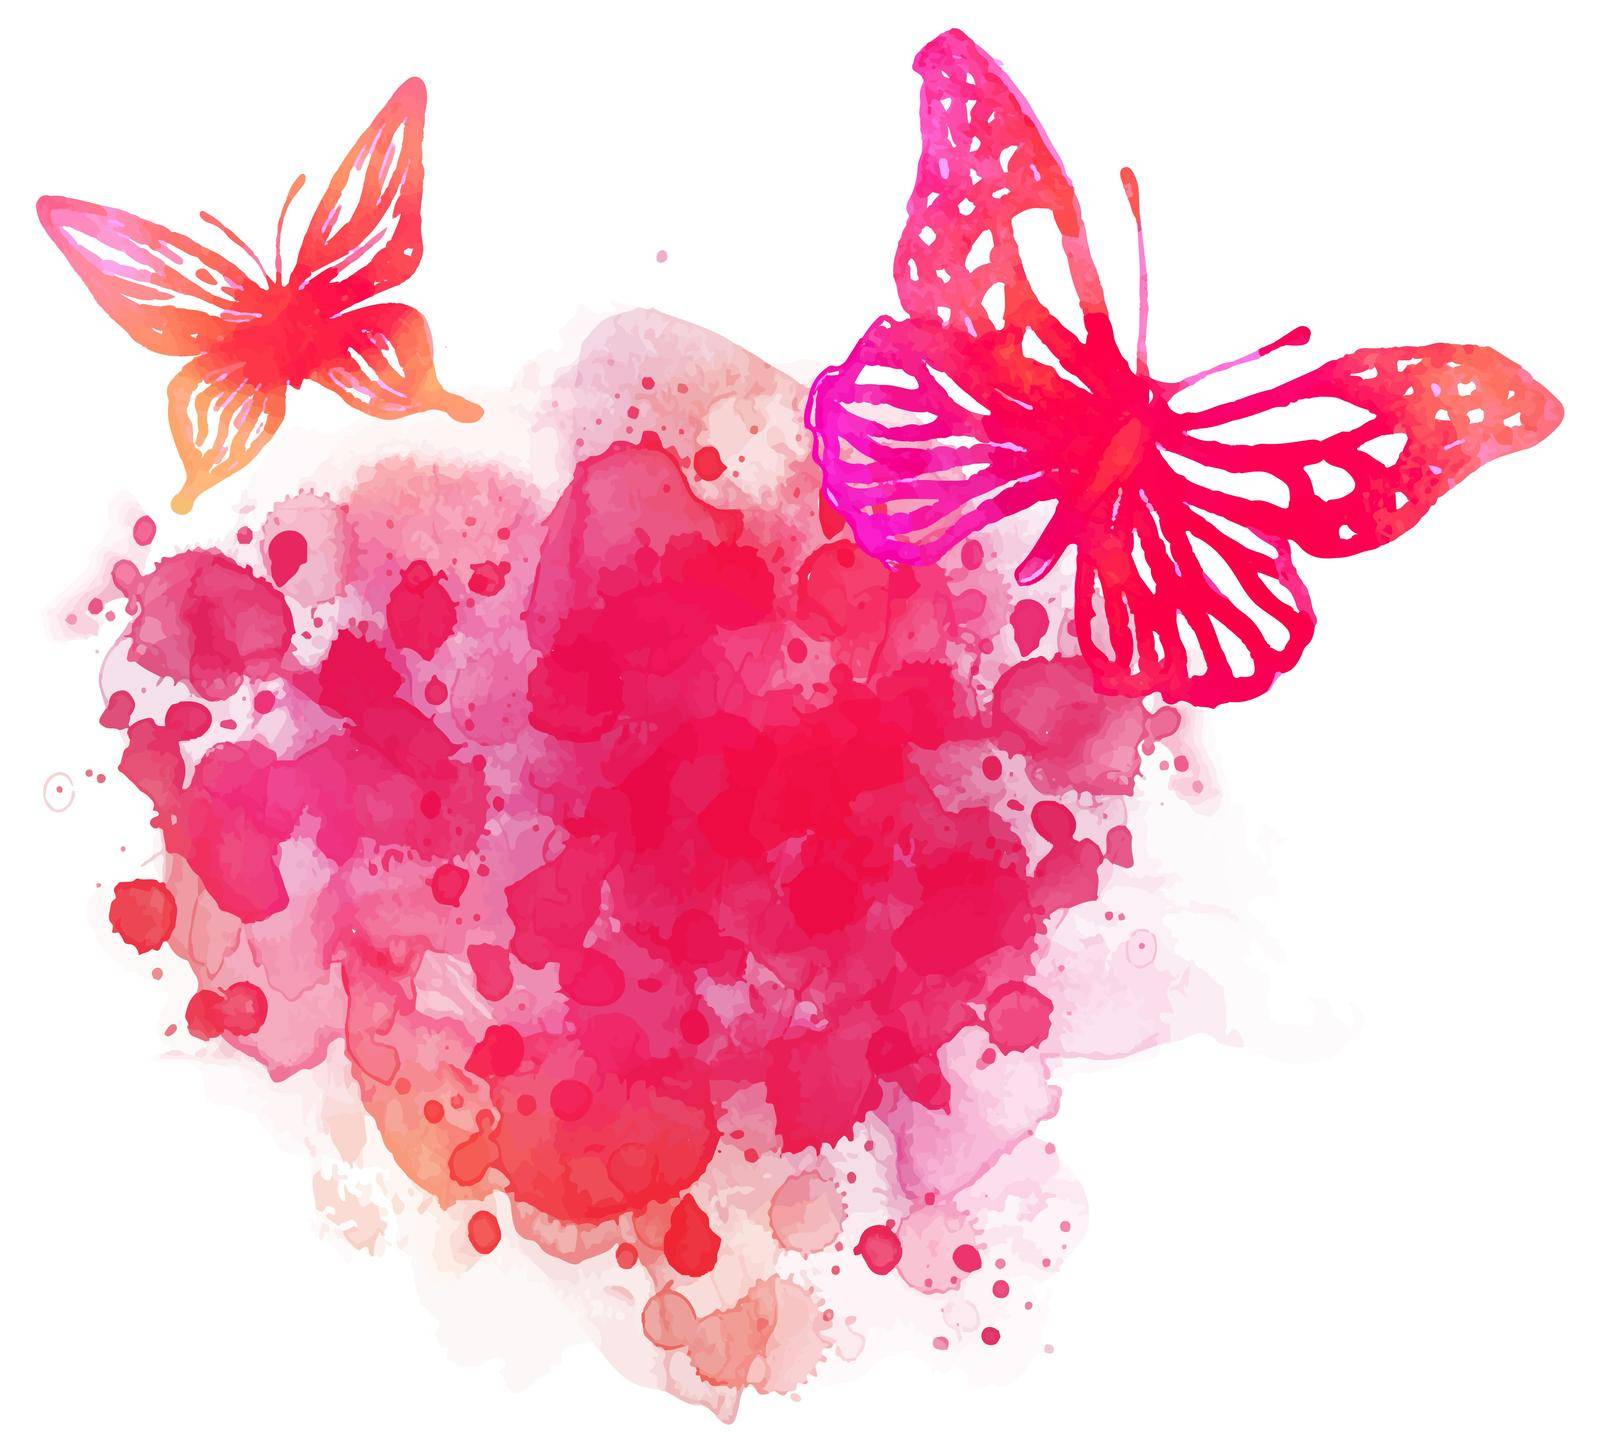 Amazing watercolor background with butterfly by varka